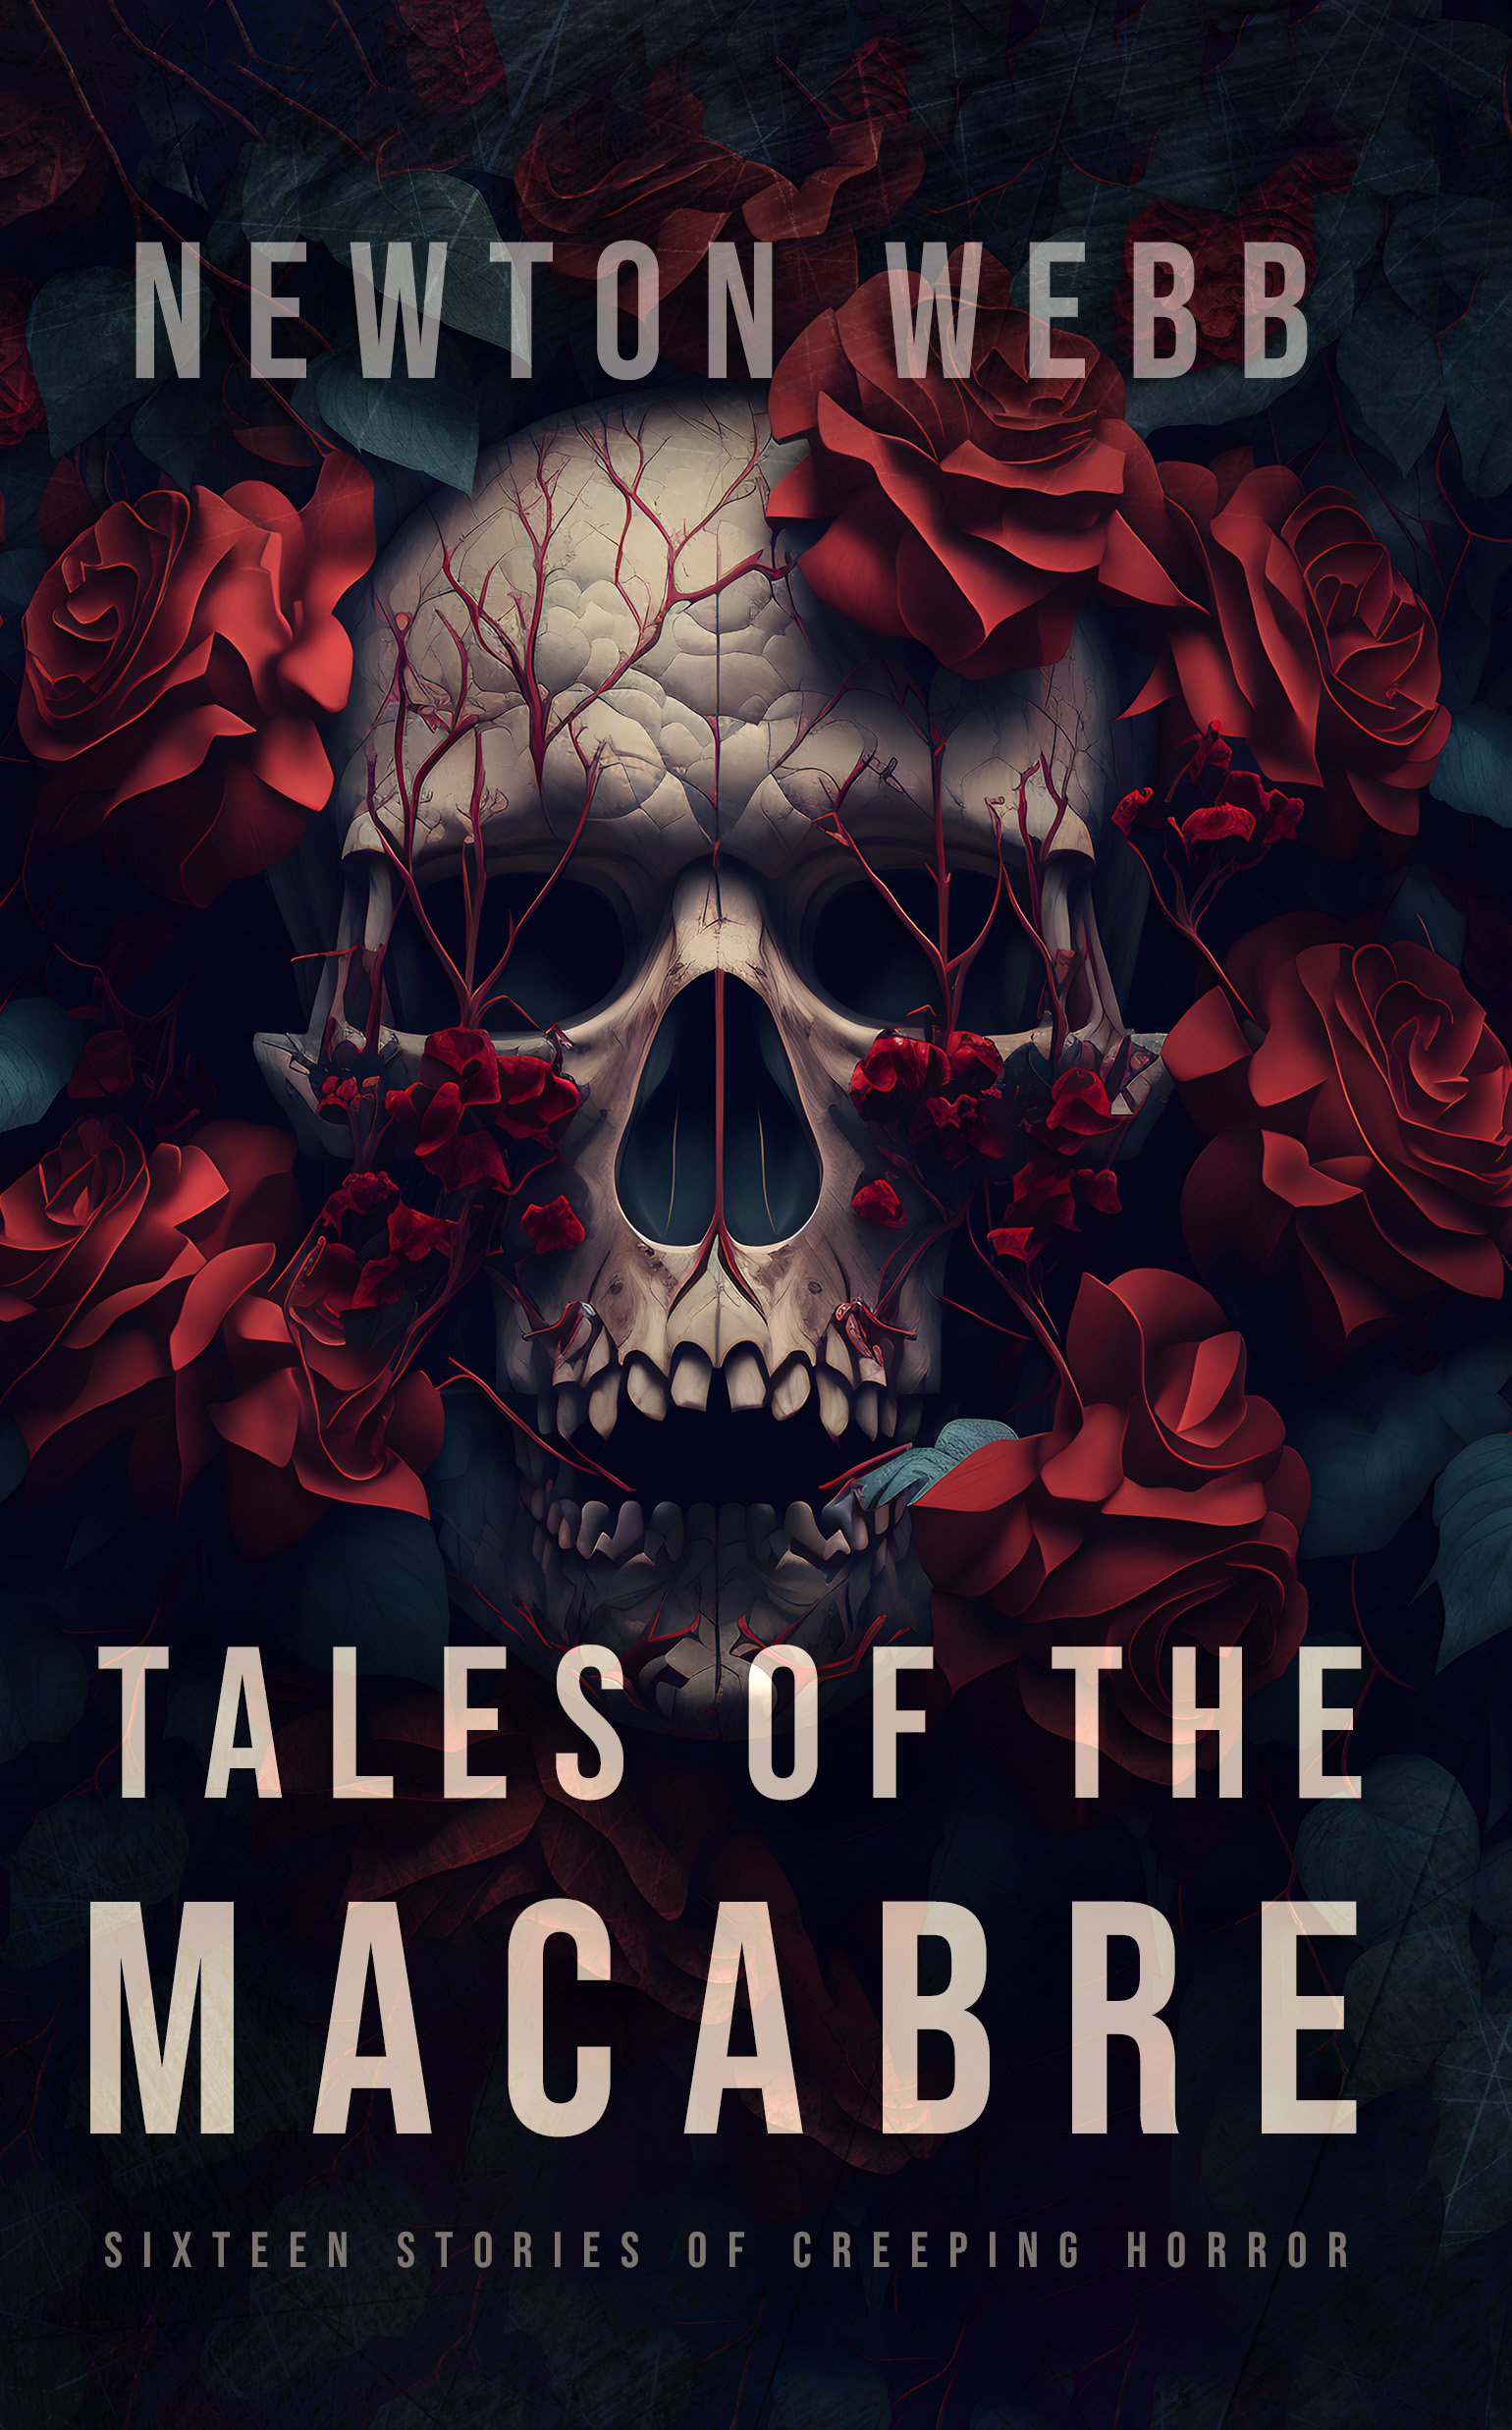 tales of the macabre_cover thumb.jpg